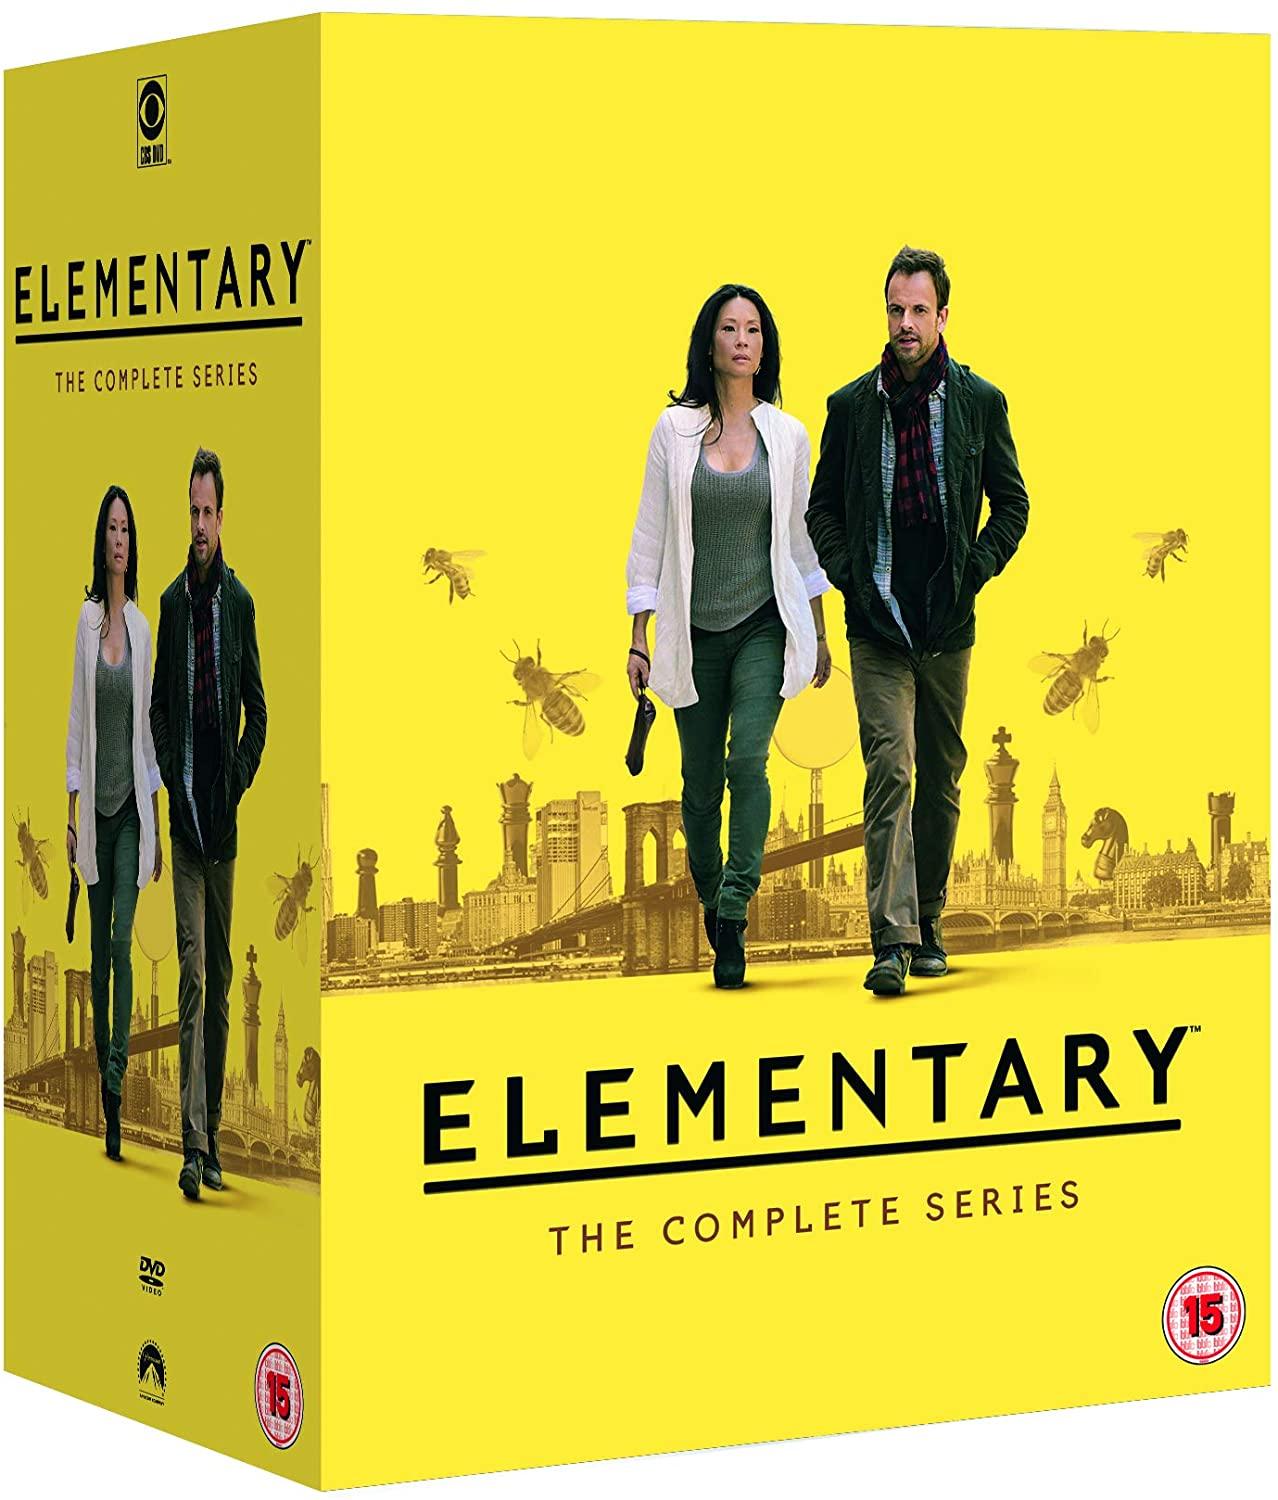 ELEMENTARY: THE COMPLETE SERIES 39DVD